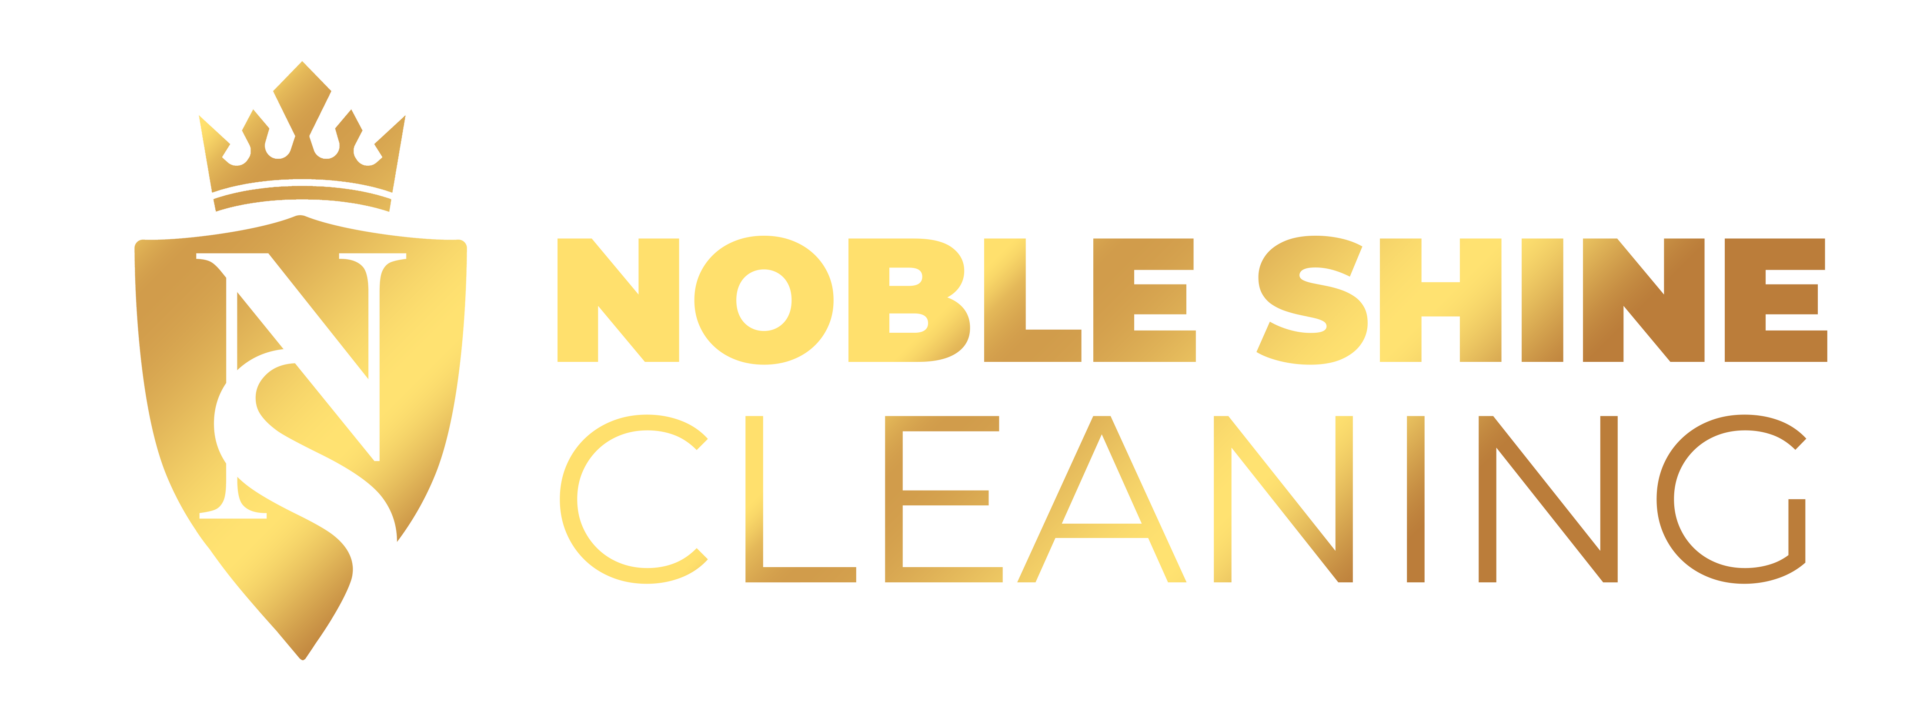 Logo of Bay Area noble shine cleaning featuring a stylized crown and company initials in a golden color palette, specializing in vacation rental deep cleaning.